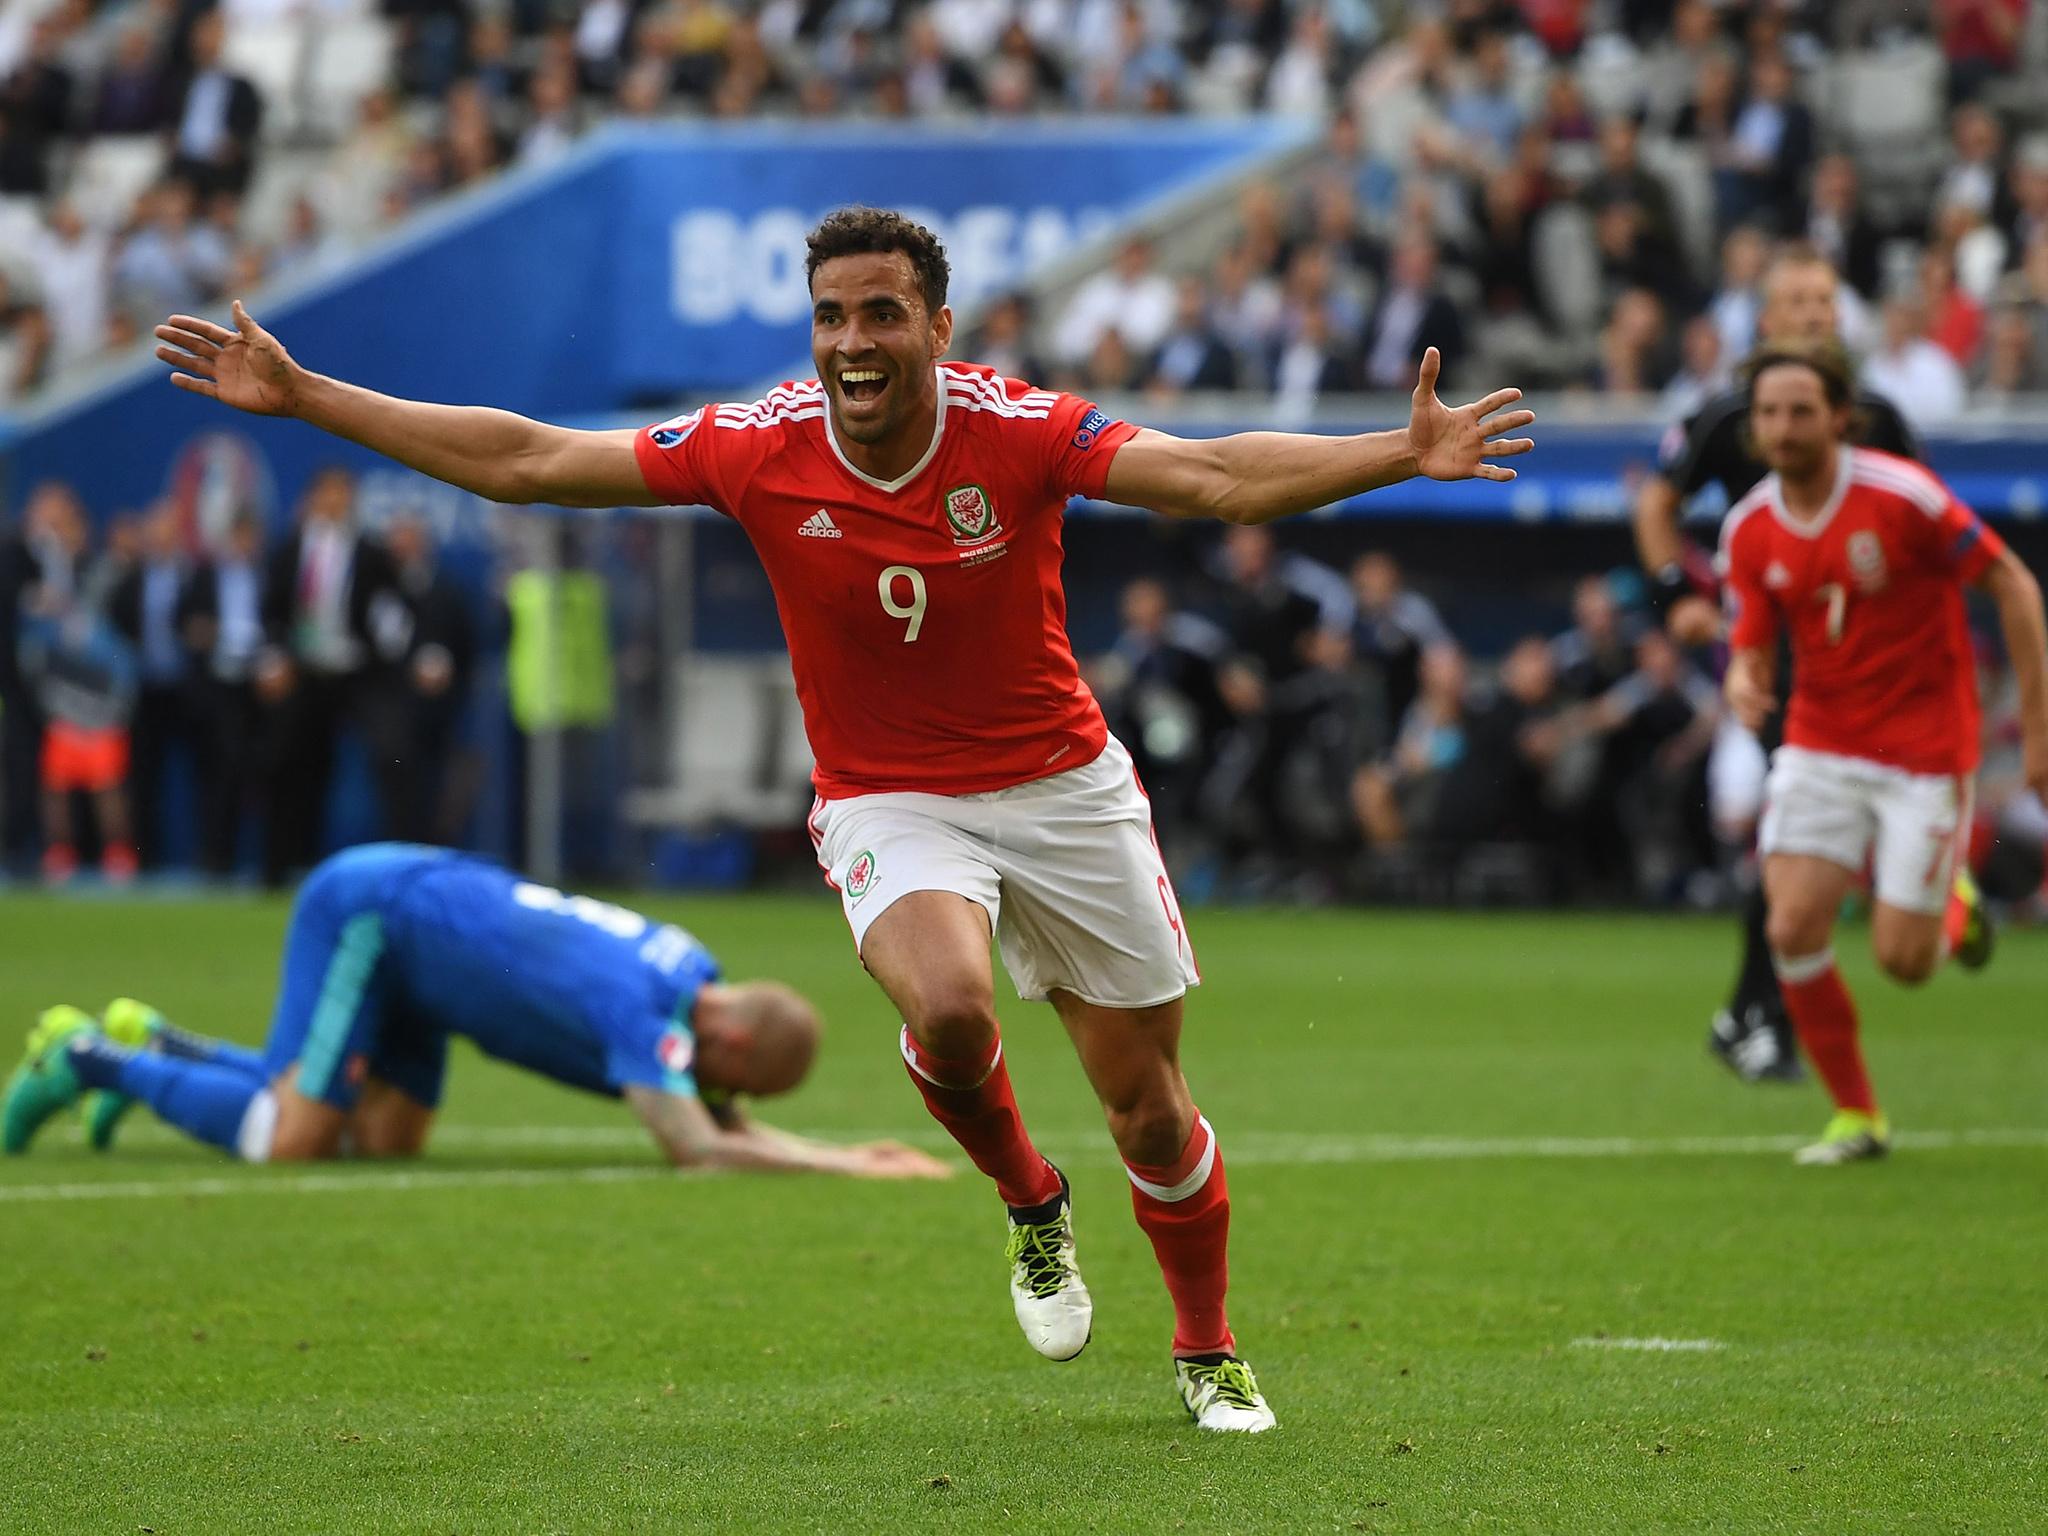 Robson-Kanu scored nine minutes from time to seal victory